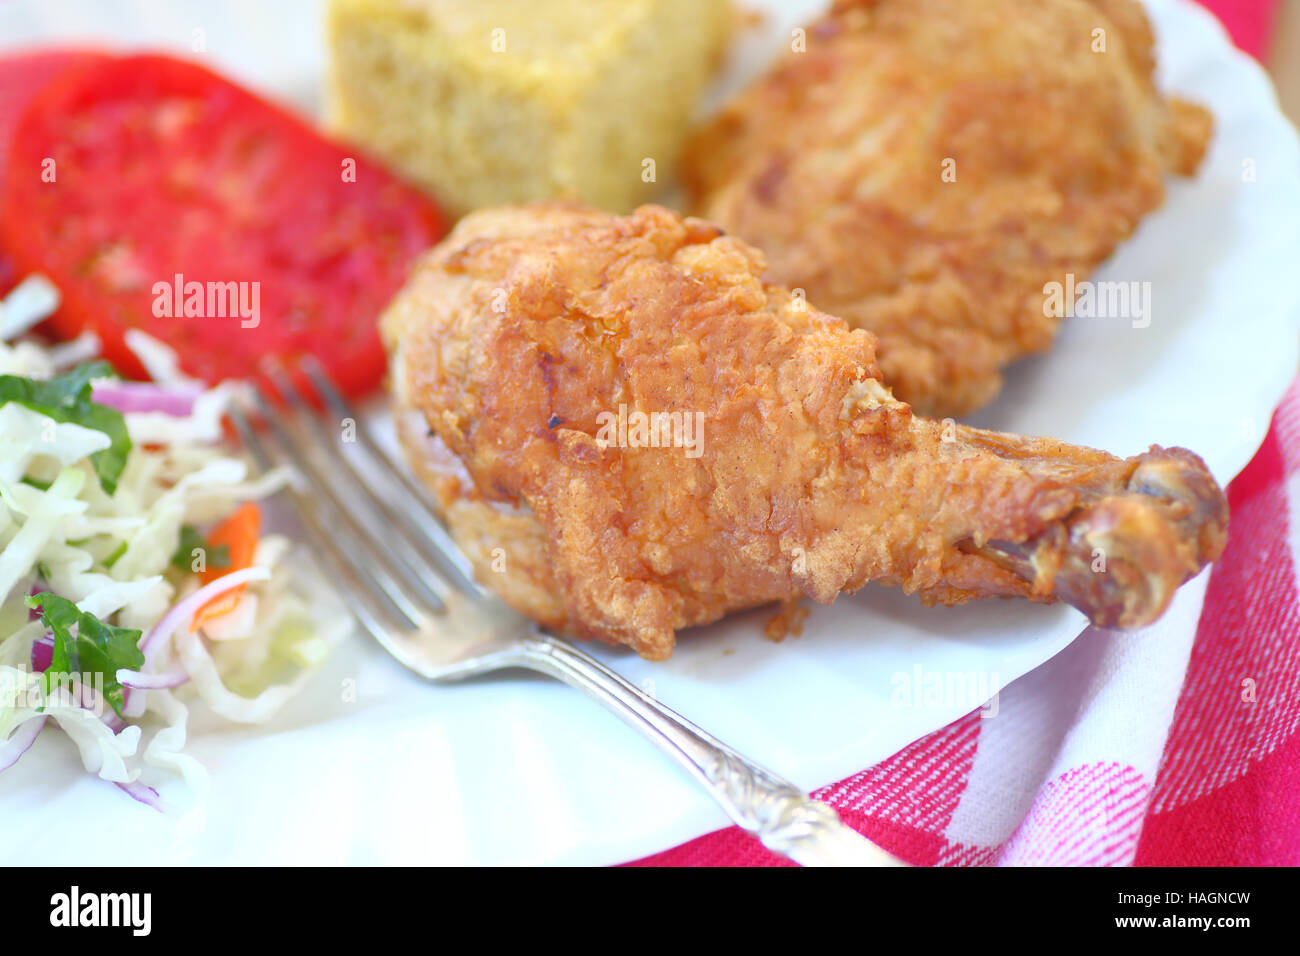 Fried chicken with coleslaw and cornbread with fork Stock Photo